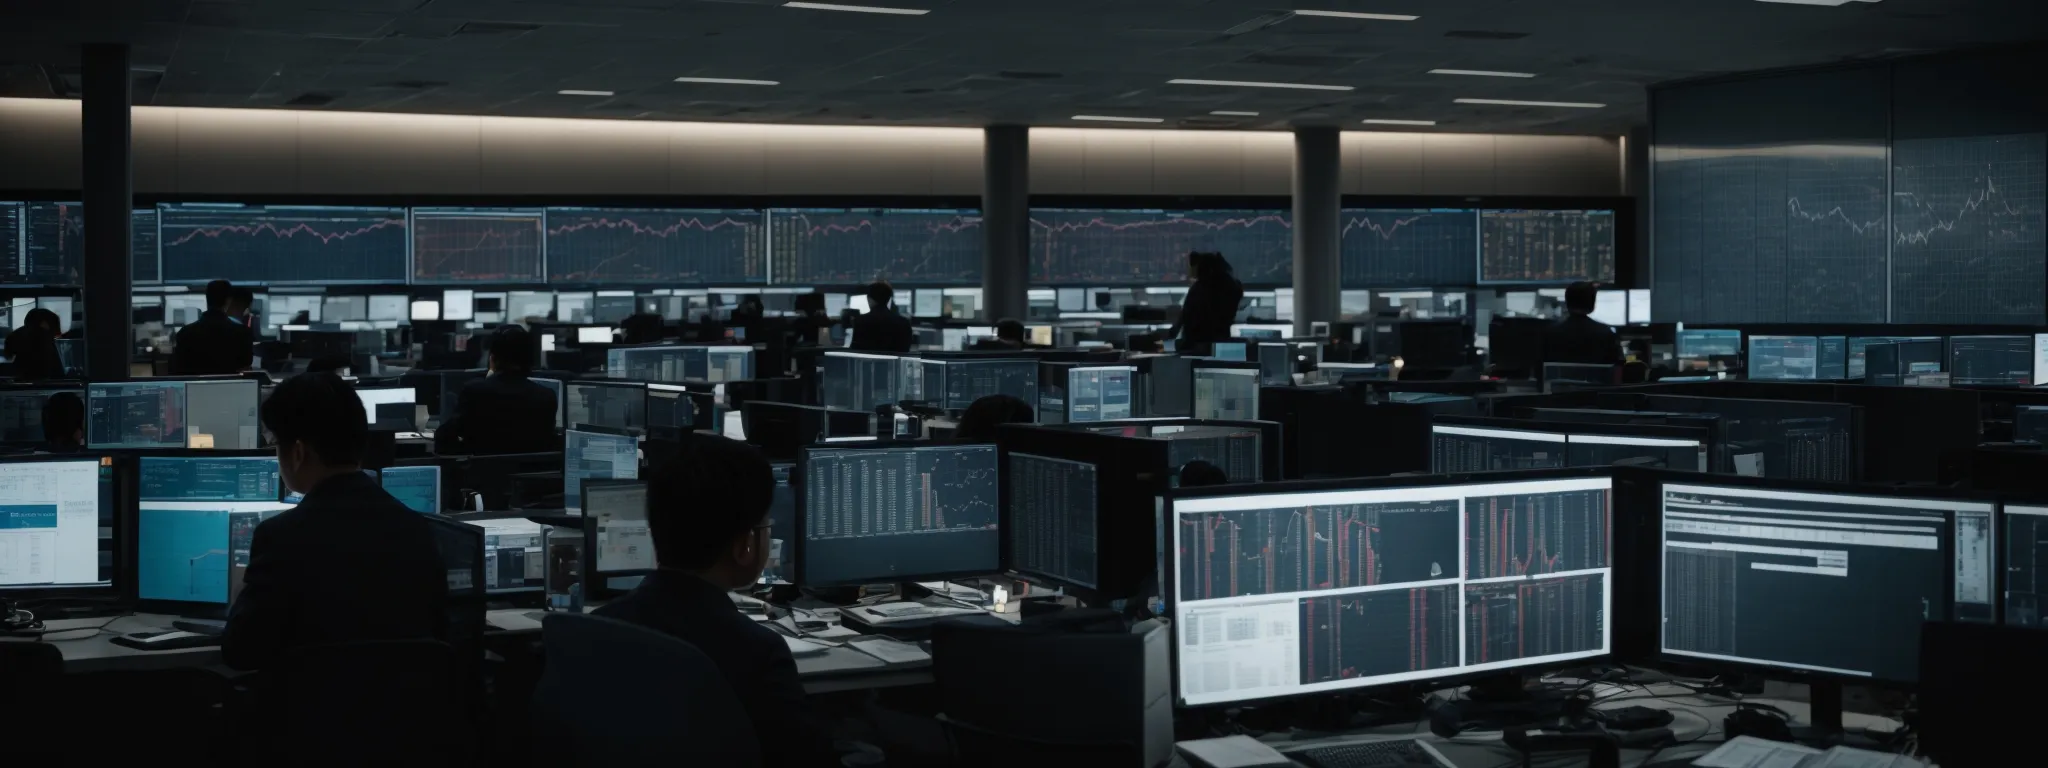 a bustling office with rows of computer monitors displaying intricate data analysis charts.